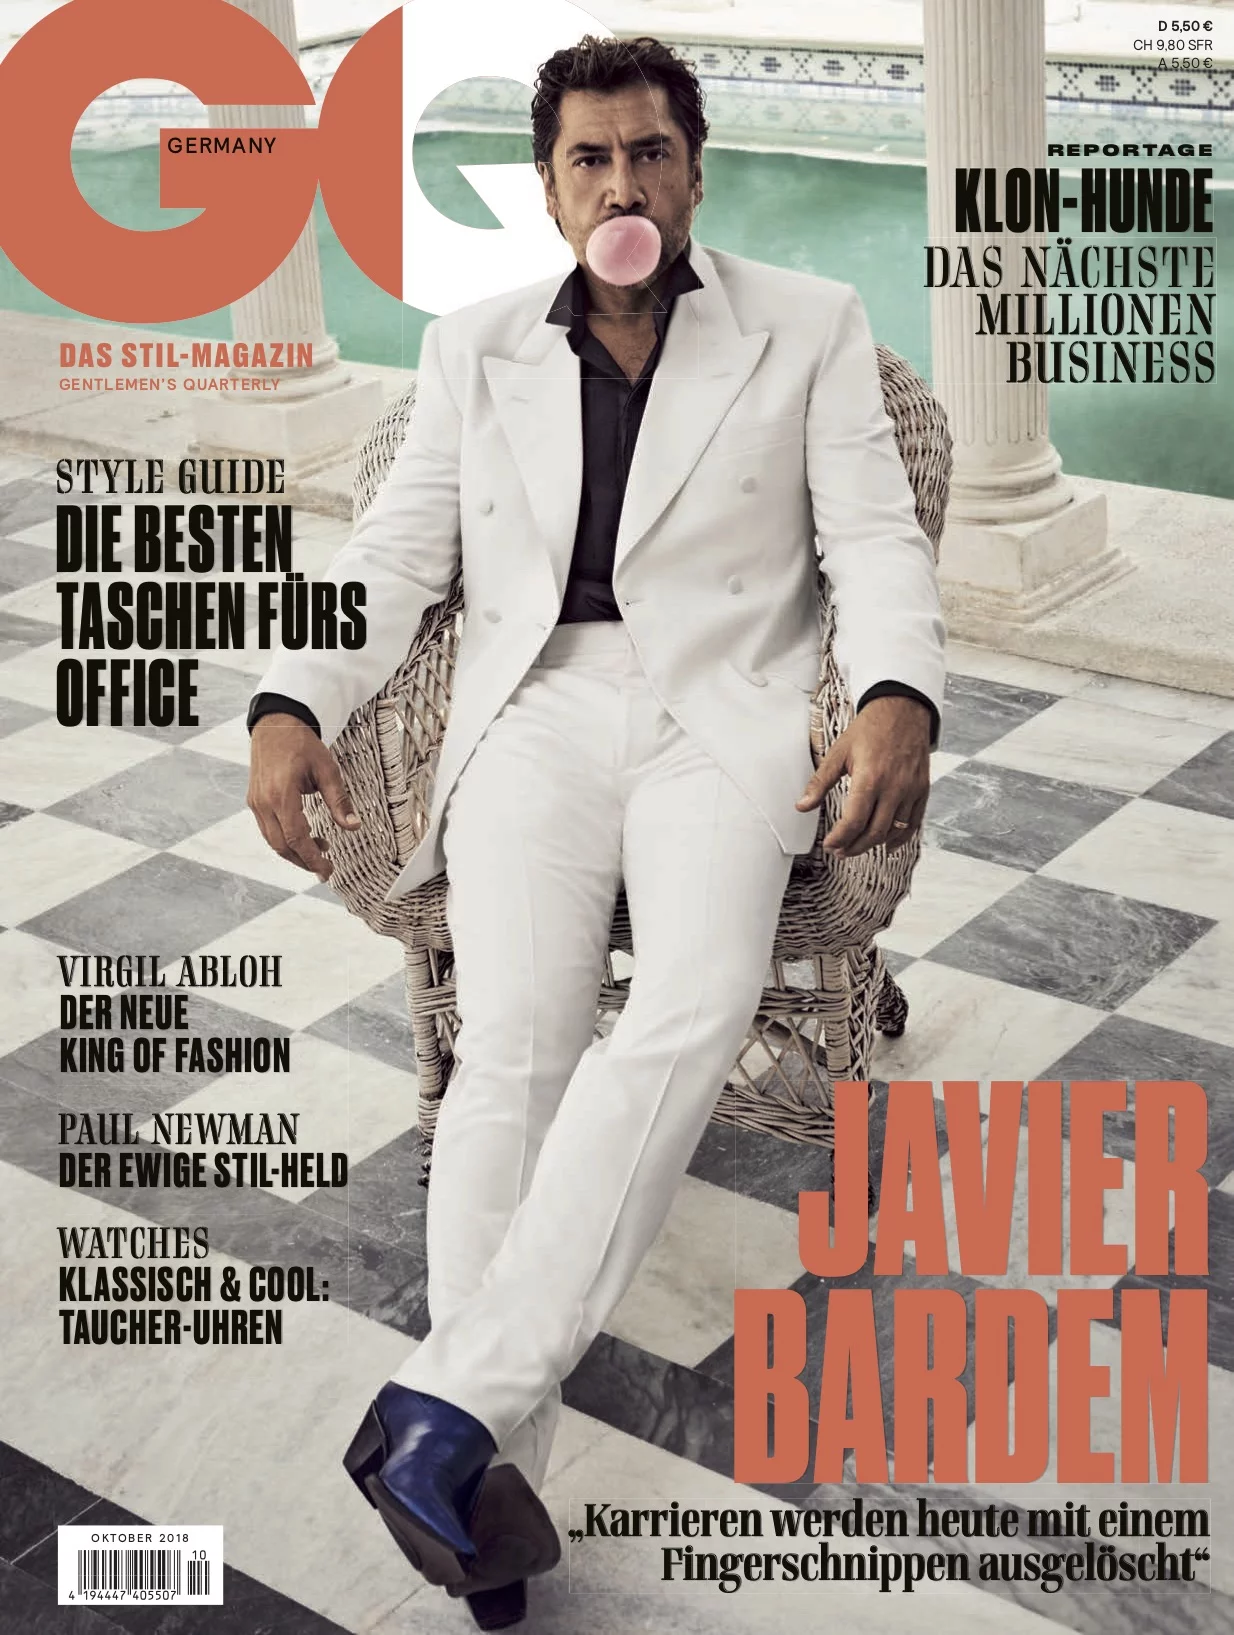 GQ with Javier Bardem 1 by Claudia ENGLMANN